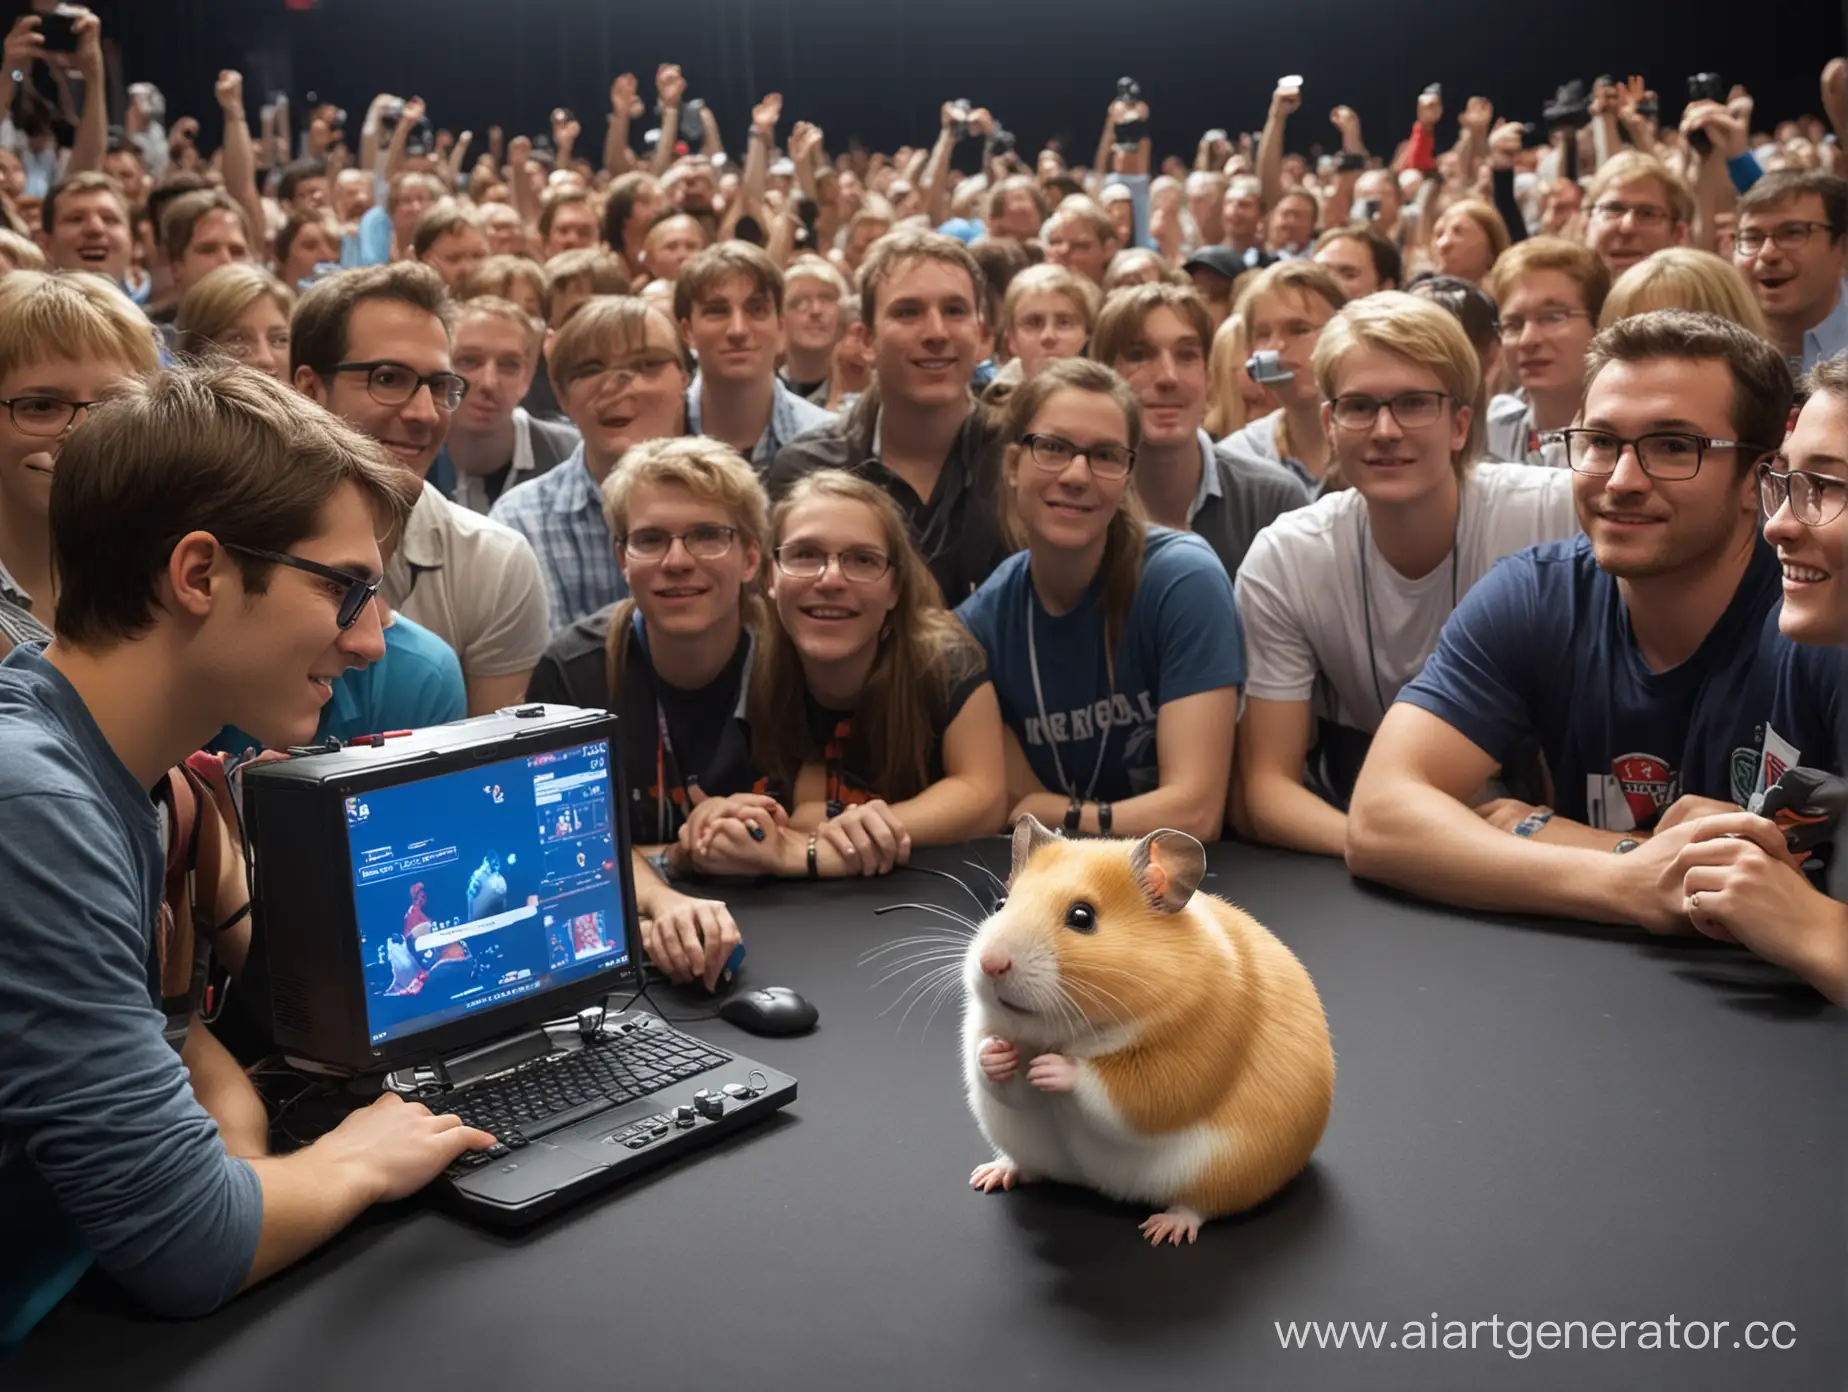 Computer-Hamster-Cyberathlete-Surrounded-by-Spectators